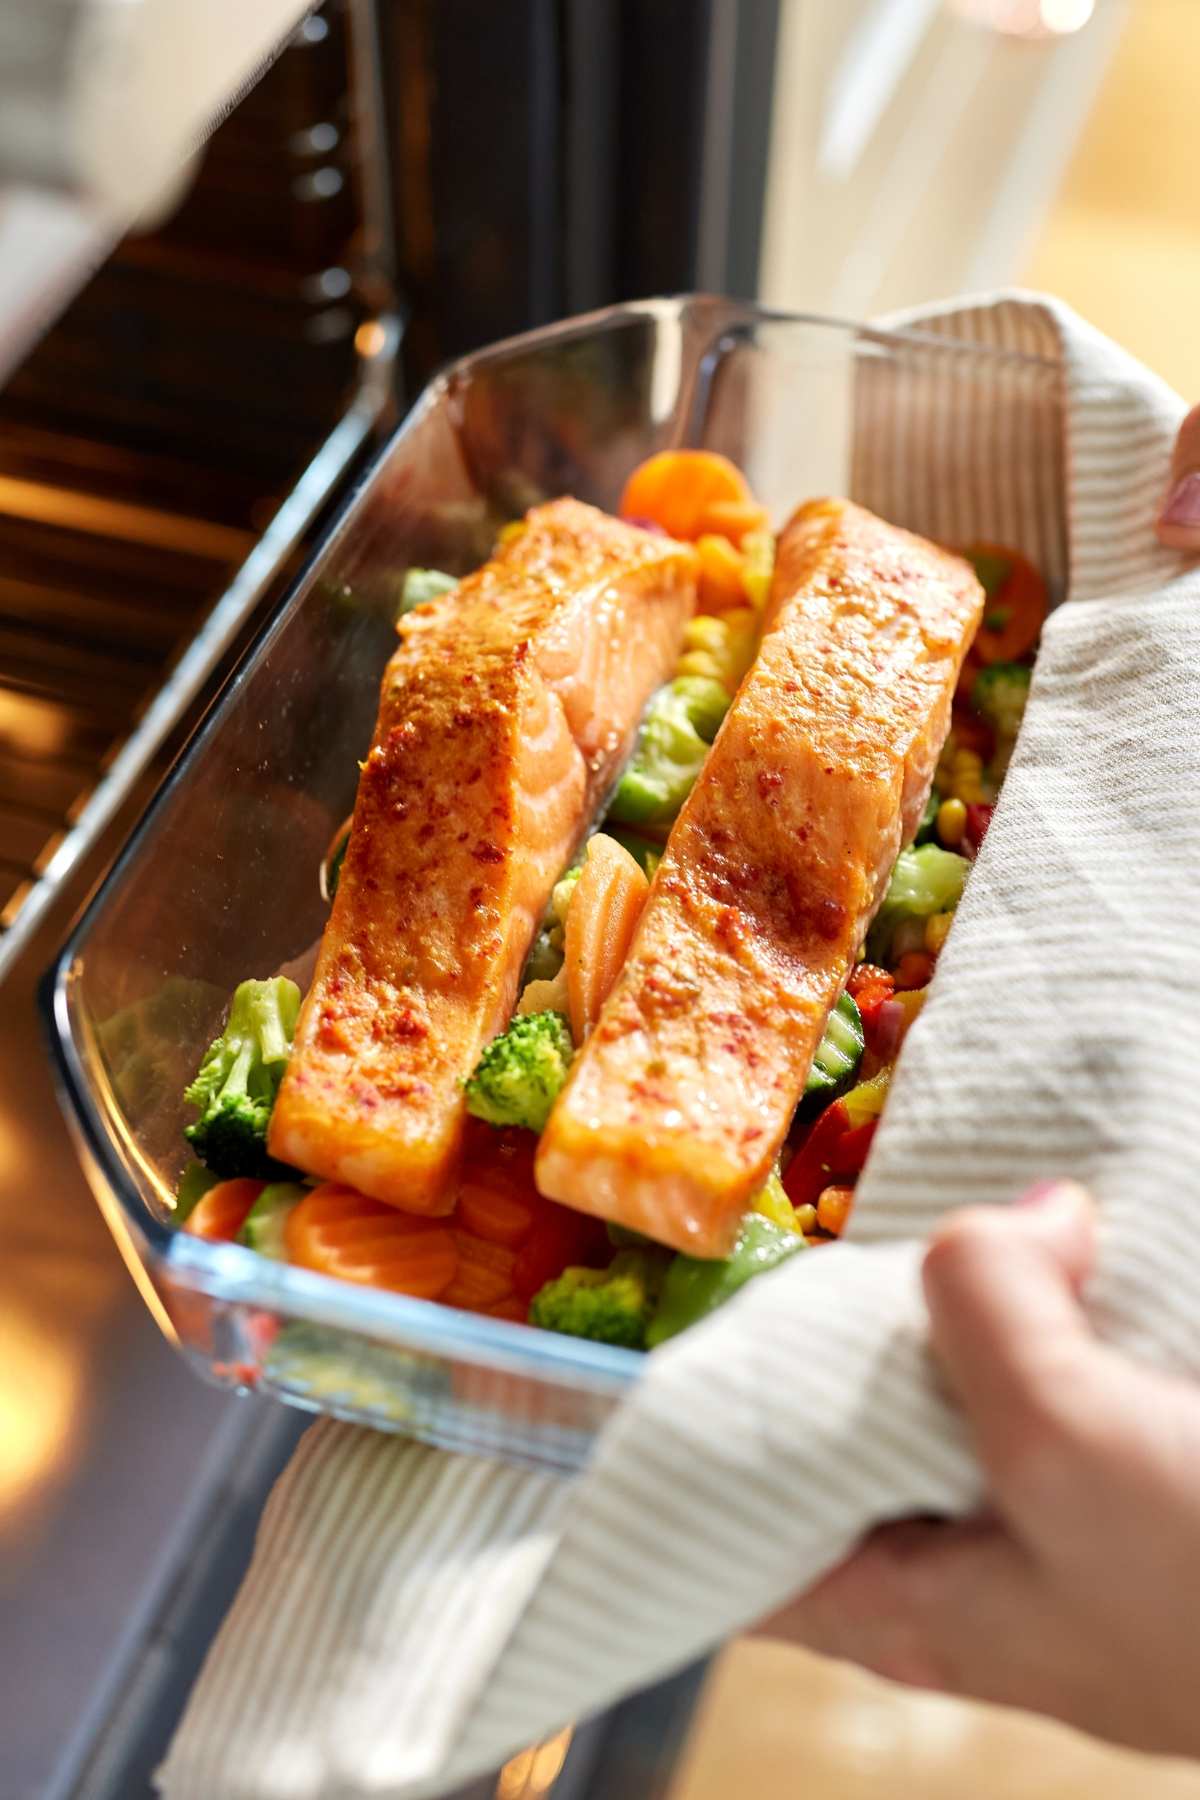 Ever wonder about the best Oven Temp to Keep Food Warm without drying out? When hosting a party, potluck, or large family gathering, you’ll need to keep food warm until your guests are ready to eat. An oven is a great tool for doing this, but how can you ensure you don’t end up overcooking the food?